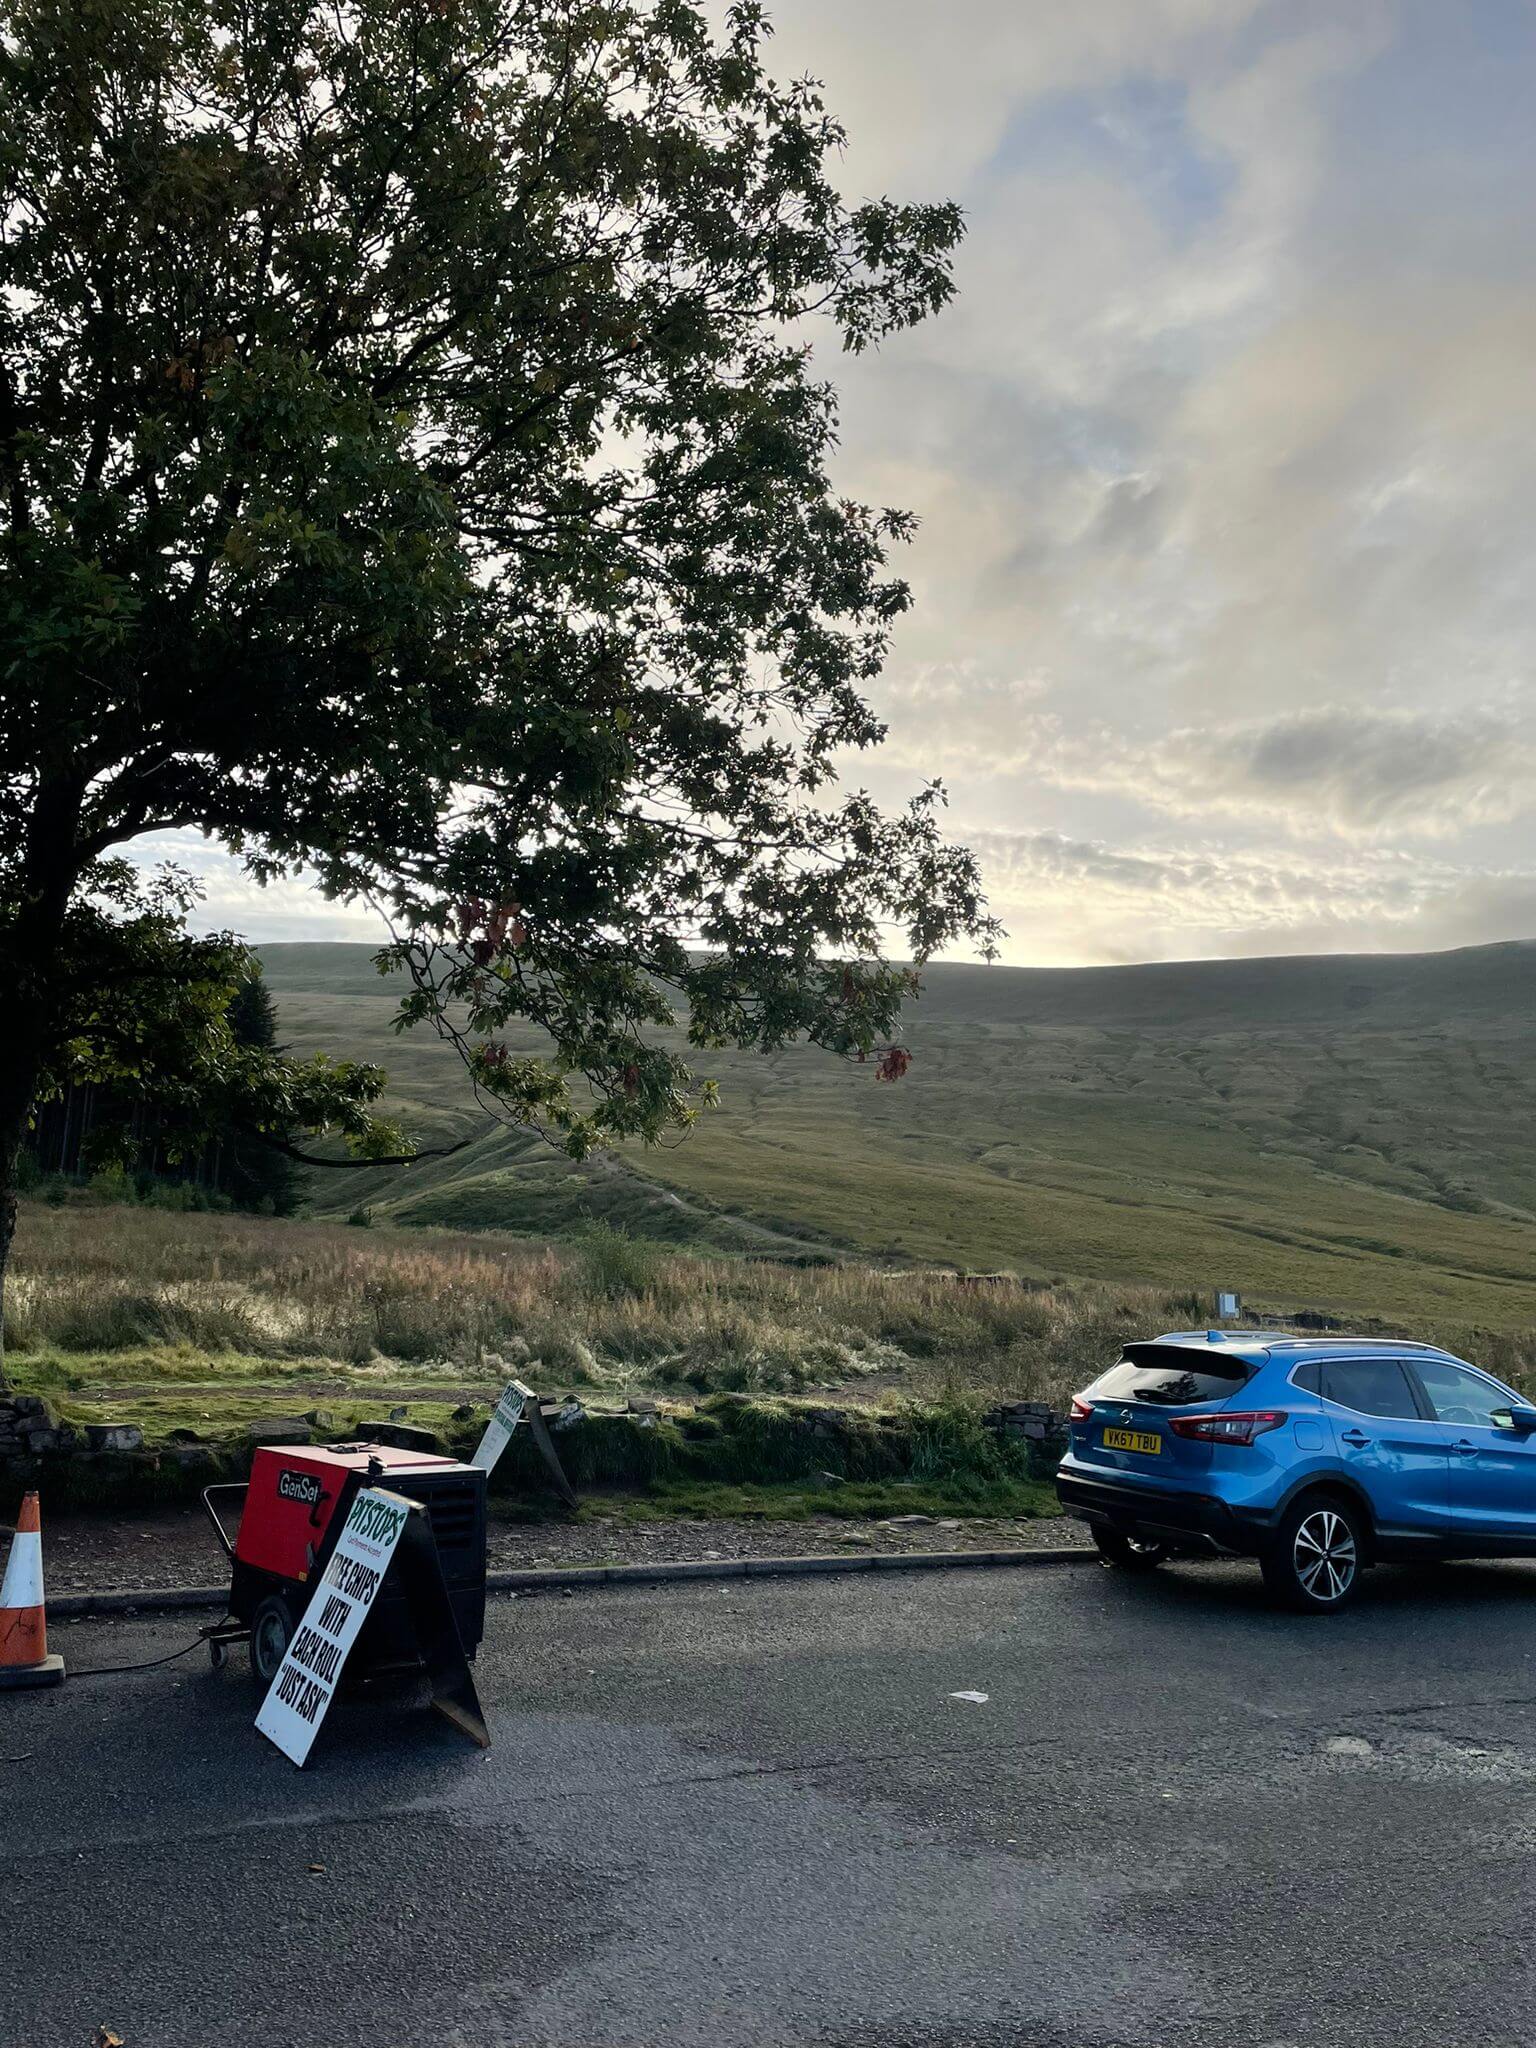 Pen Y Fan Car Park with blue car and Pitstops sign in front with tree in back